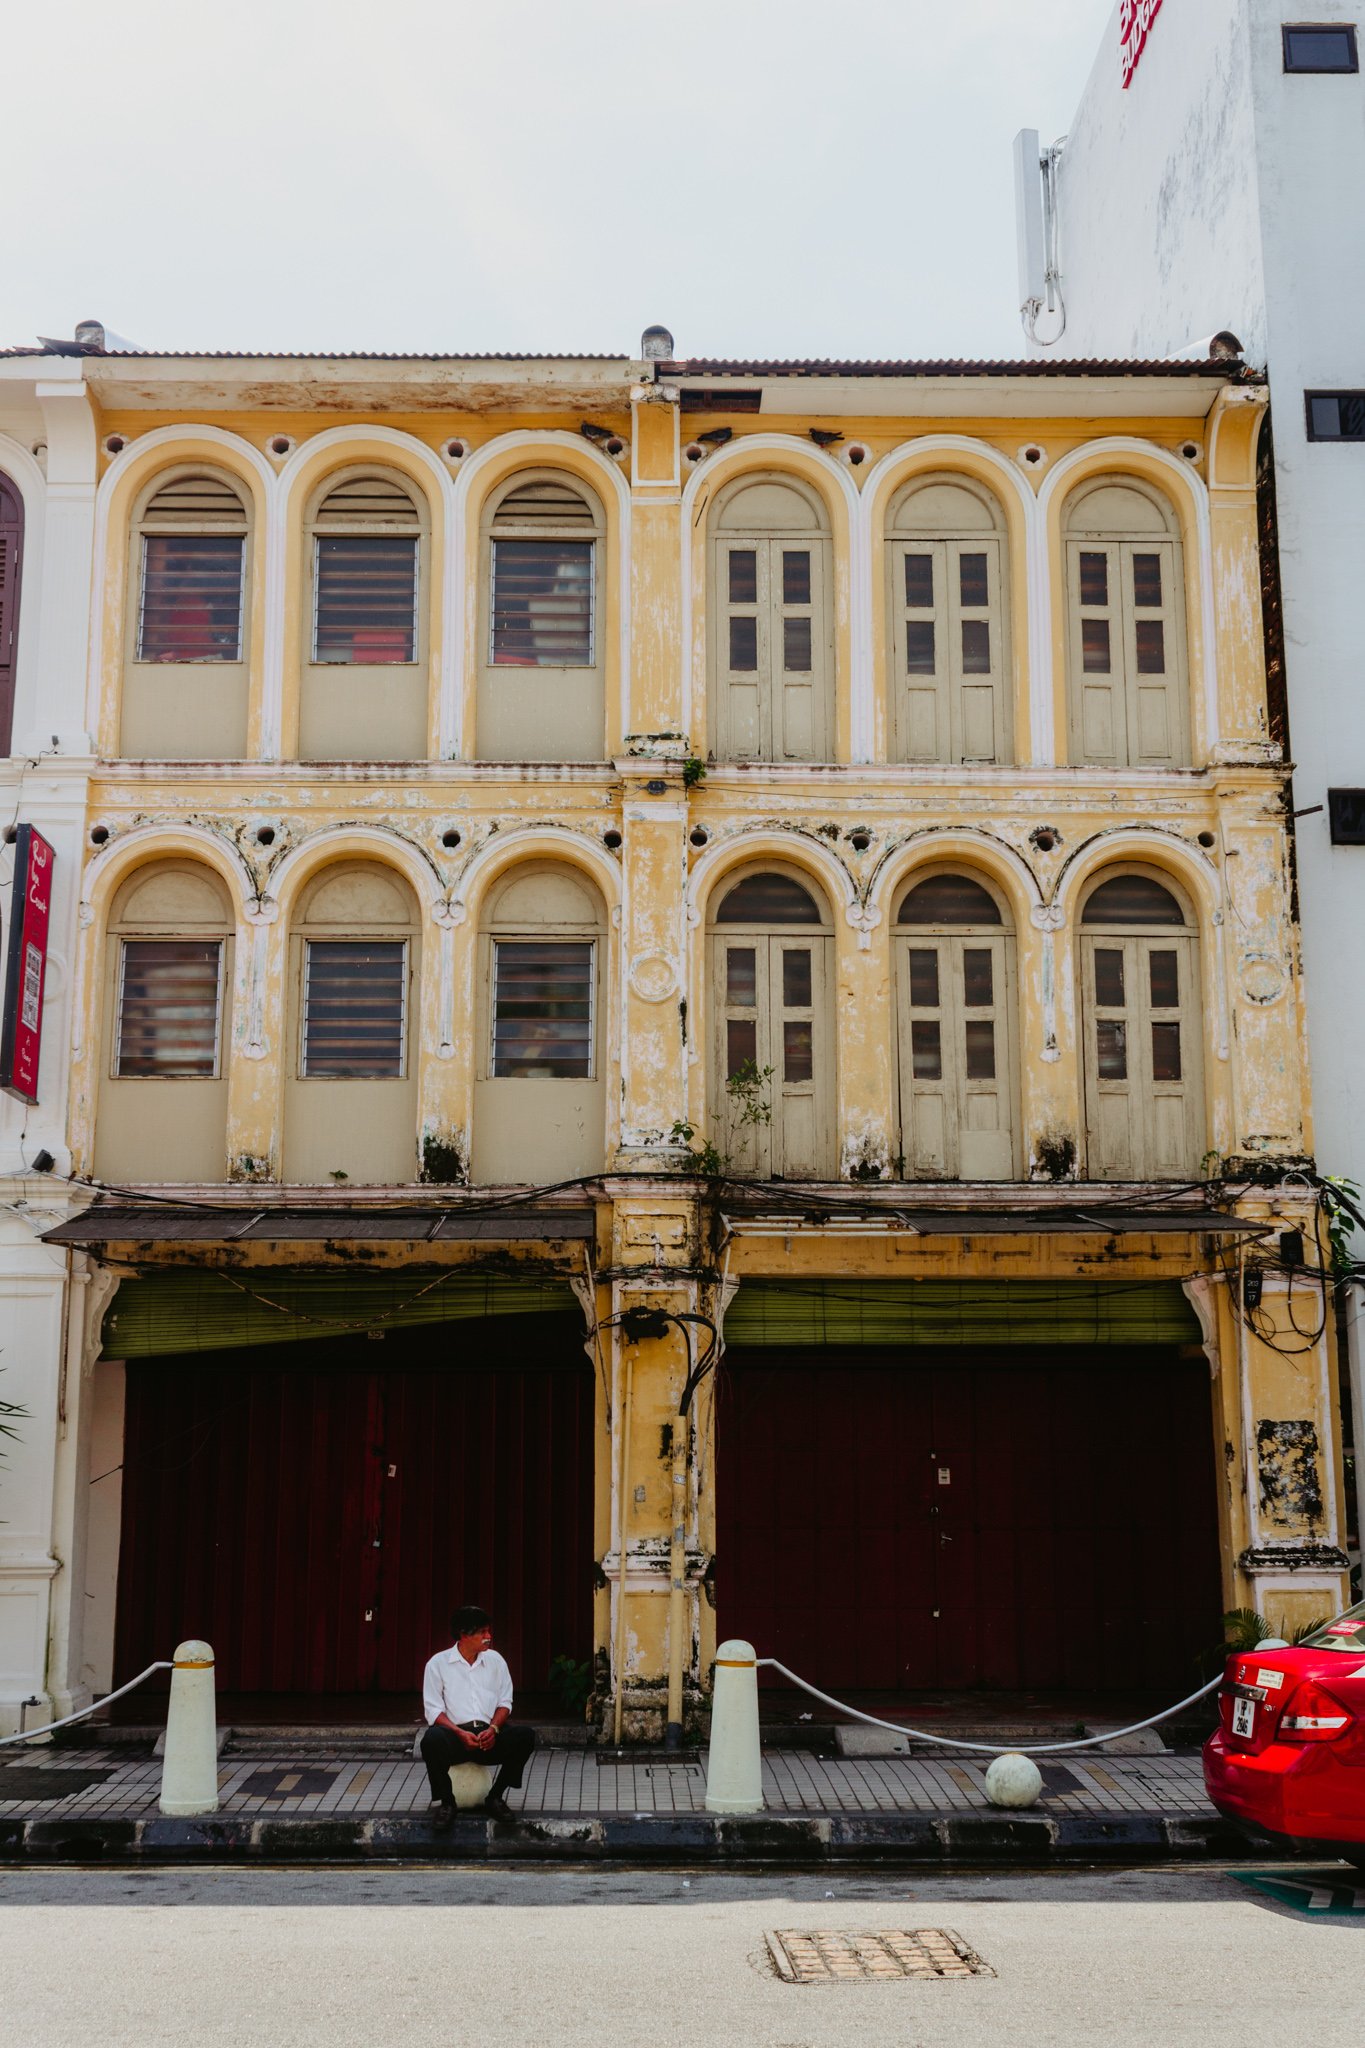 A old building in Penang, Malaysia